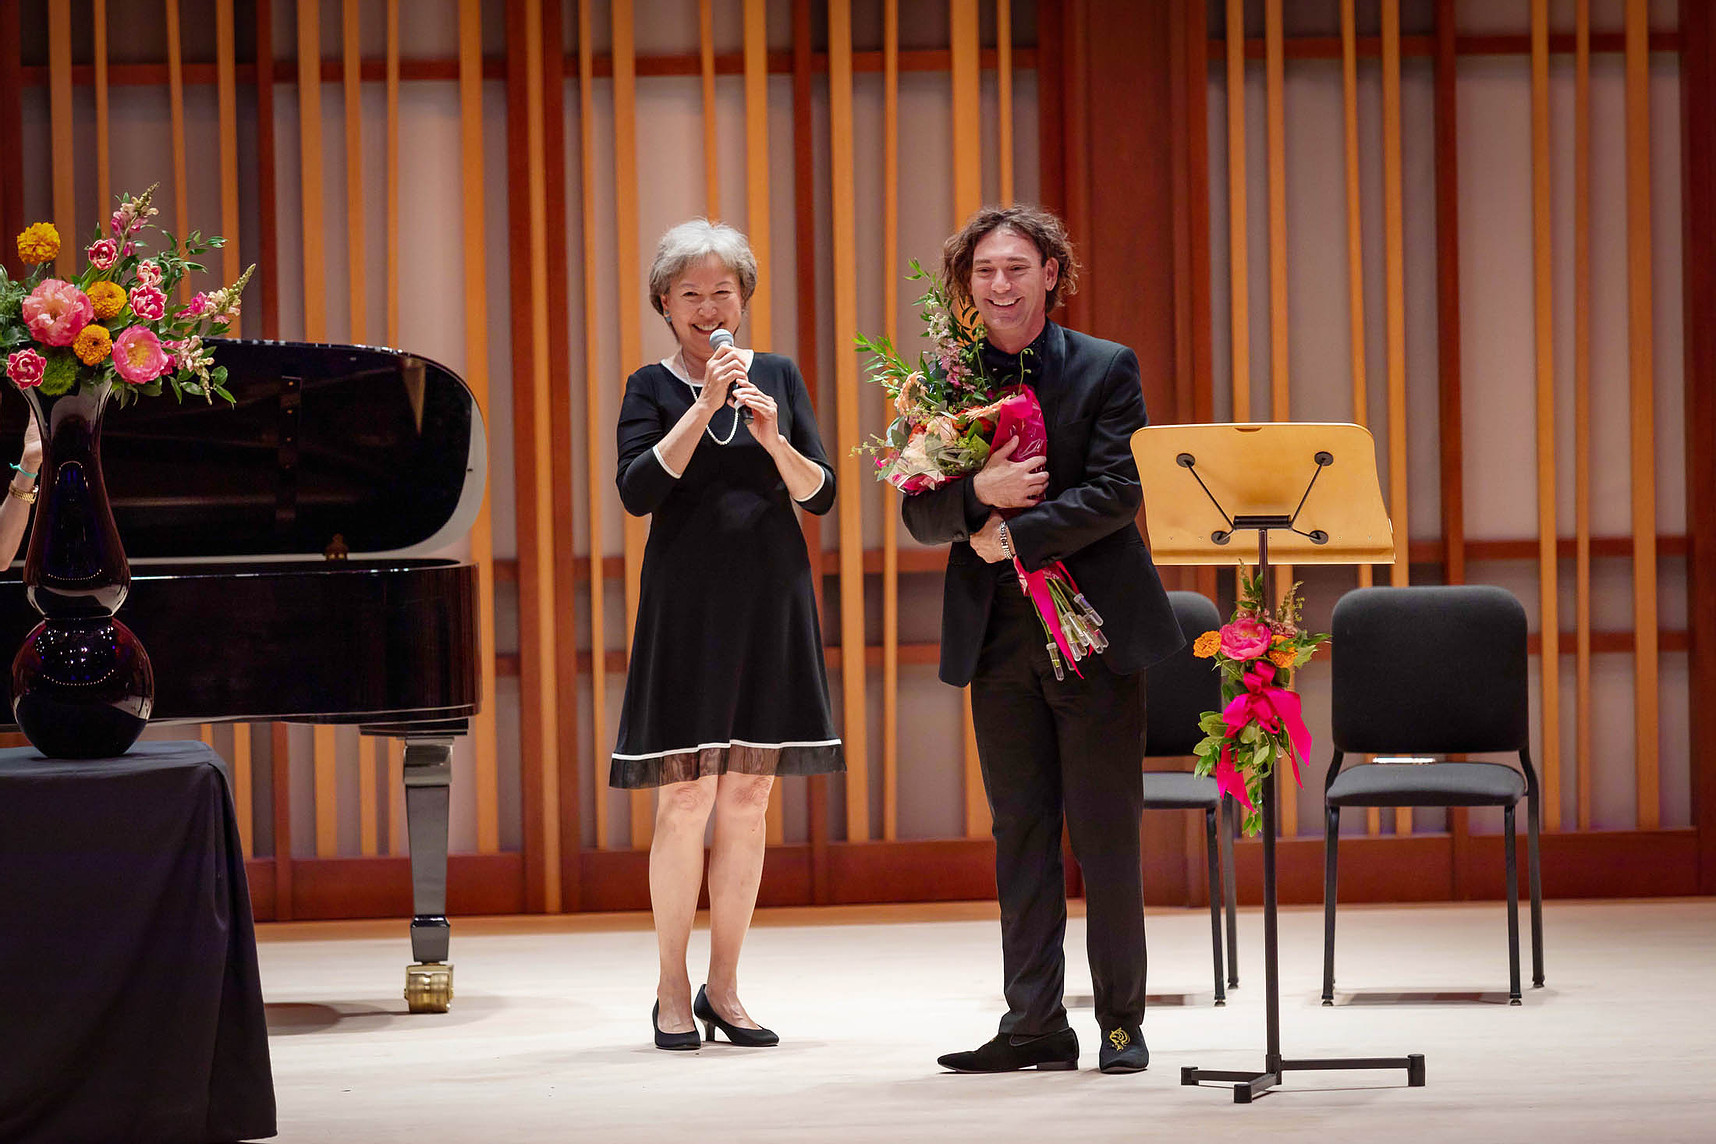 Lulu Hsu (left) and Glenn Kramer (right) at the 2019 International Piano Competition & Festival for Outstanding Amateurs